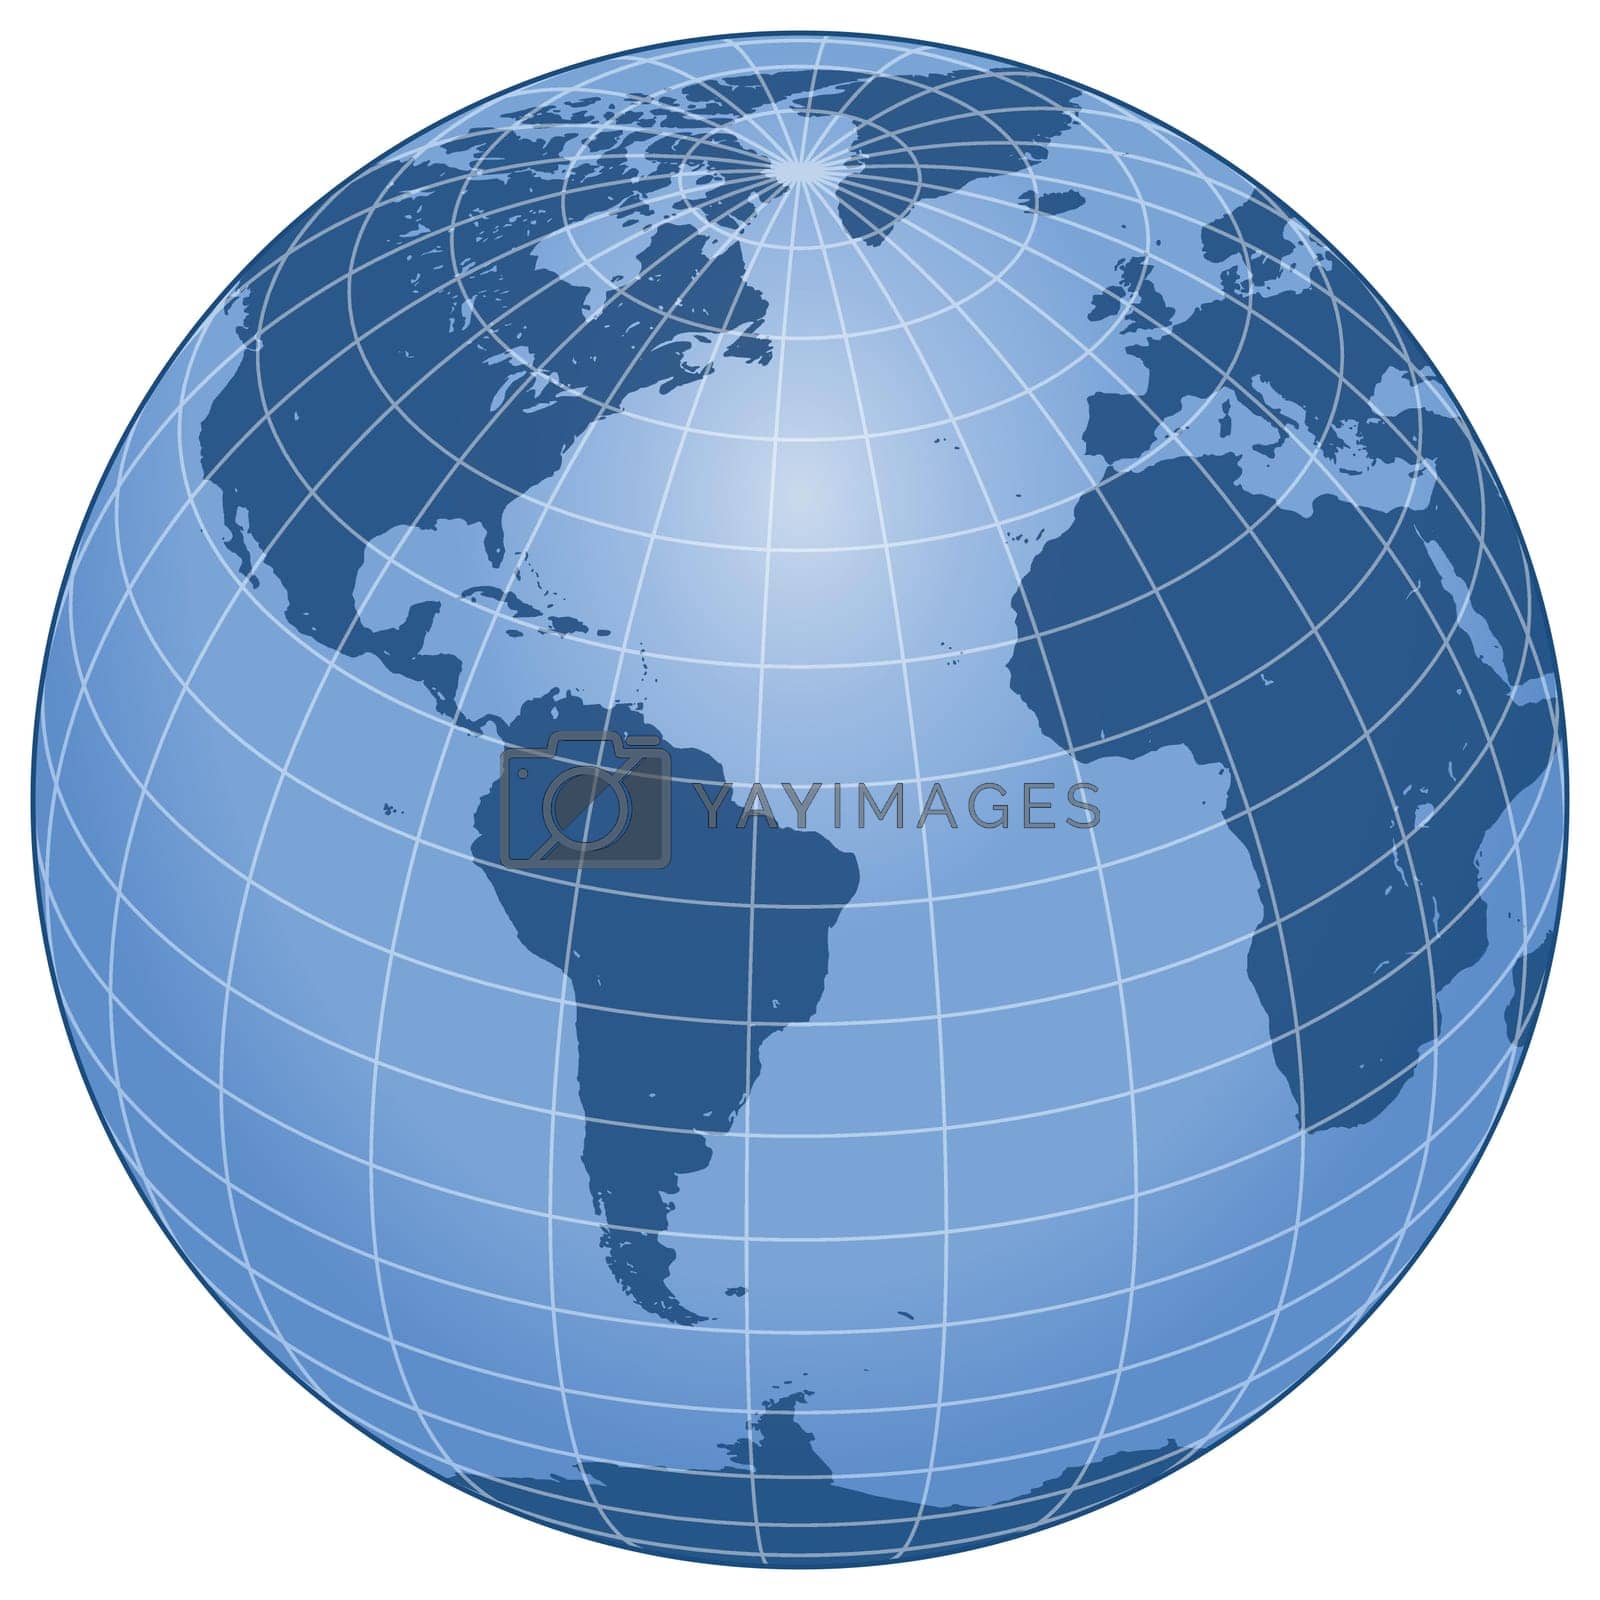 Royalty free image of Vector design of planet earth by deibyvargas